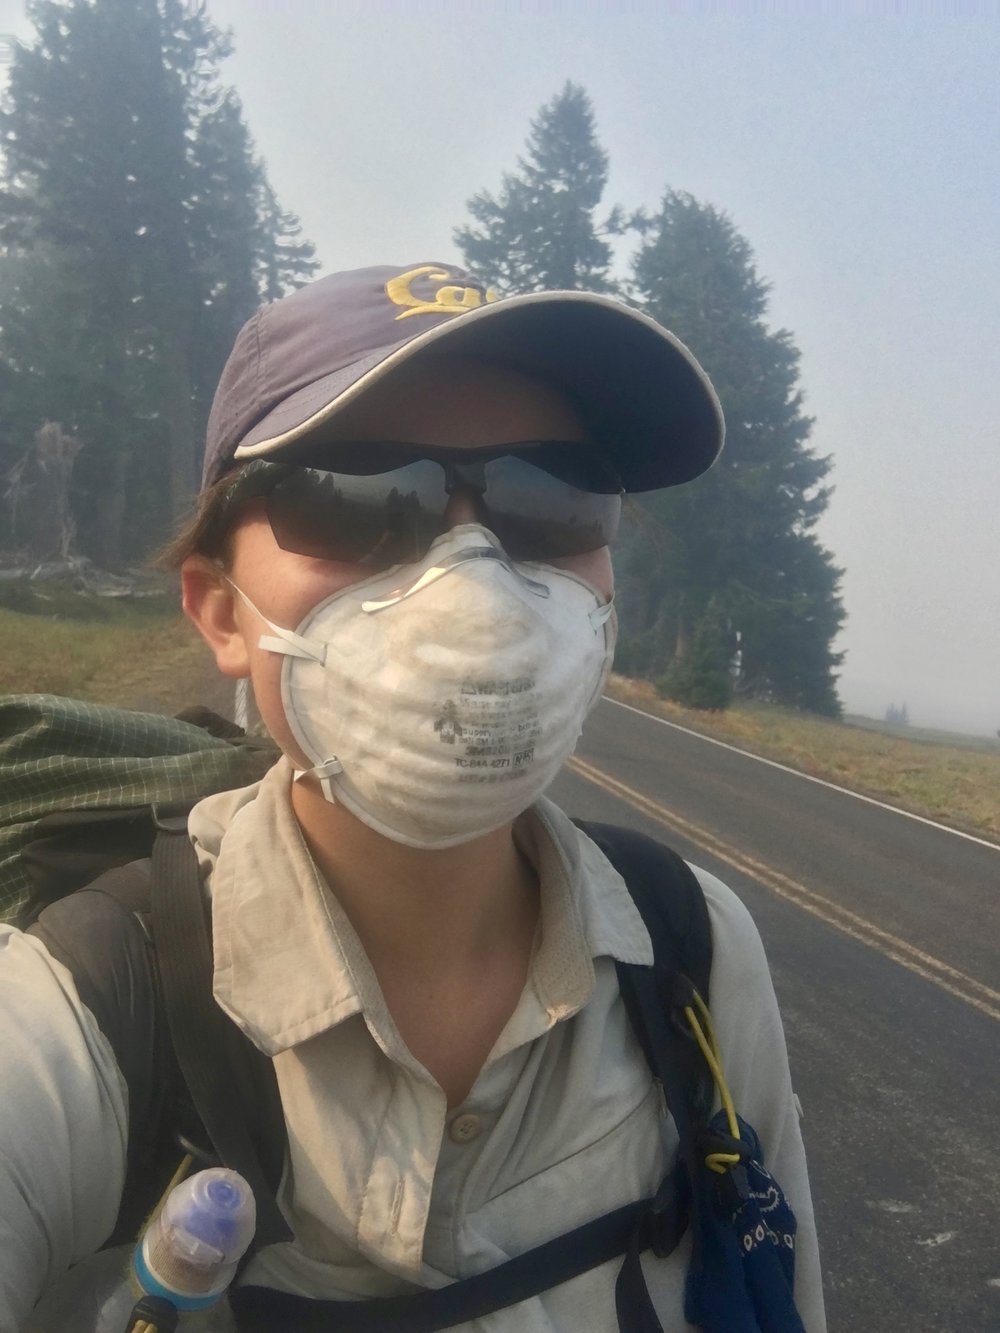 Road walking around Crater Lake with a smoke mask. We didn’t get to see the lake that day because the bowl was completely filled with smoke from nearby wildfires.